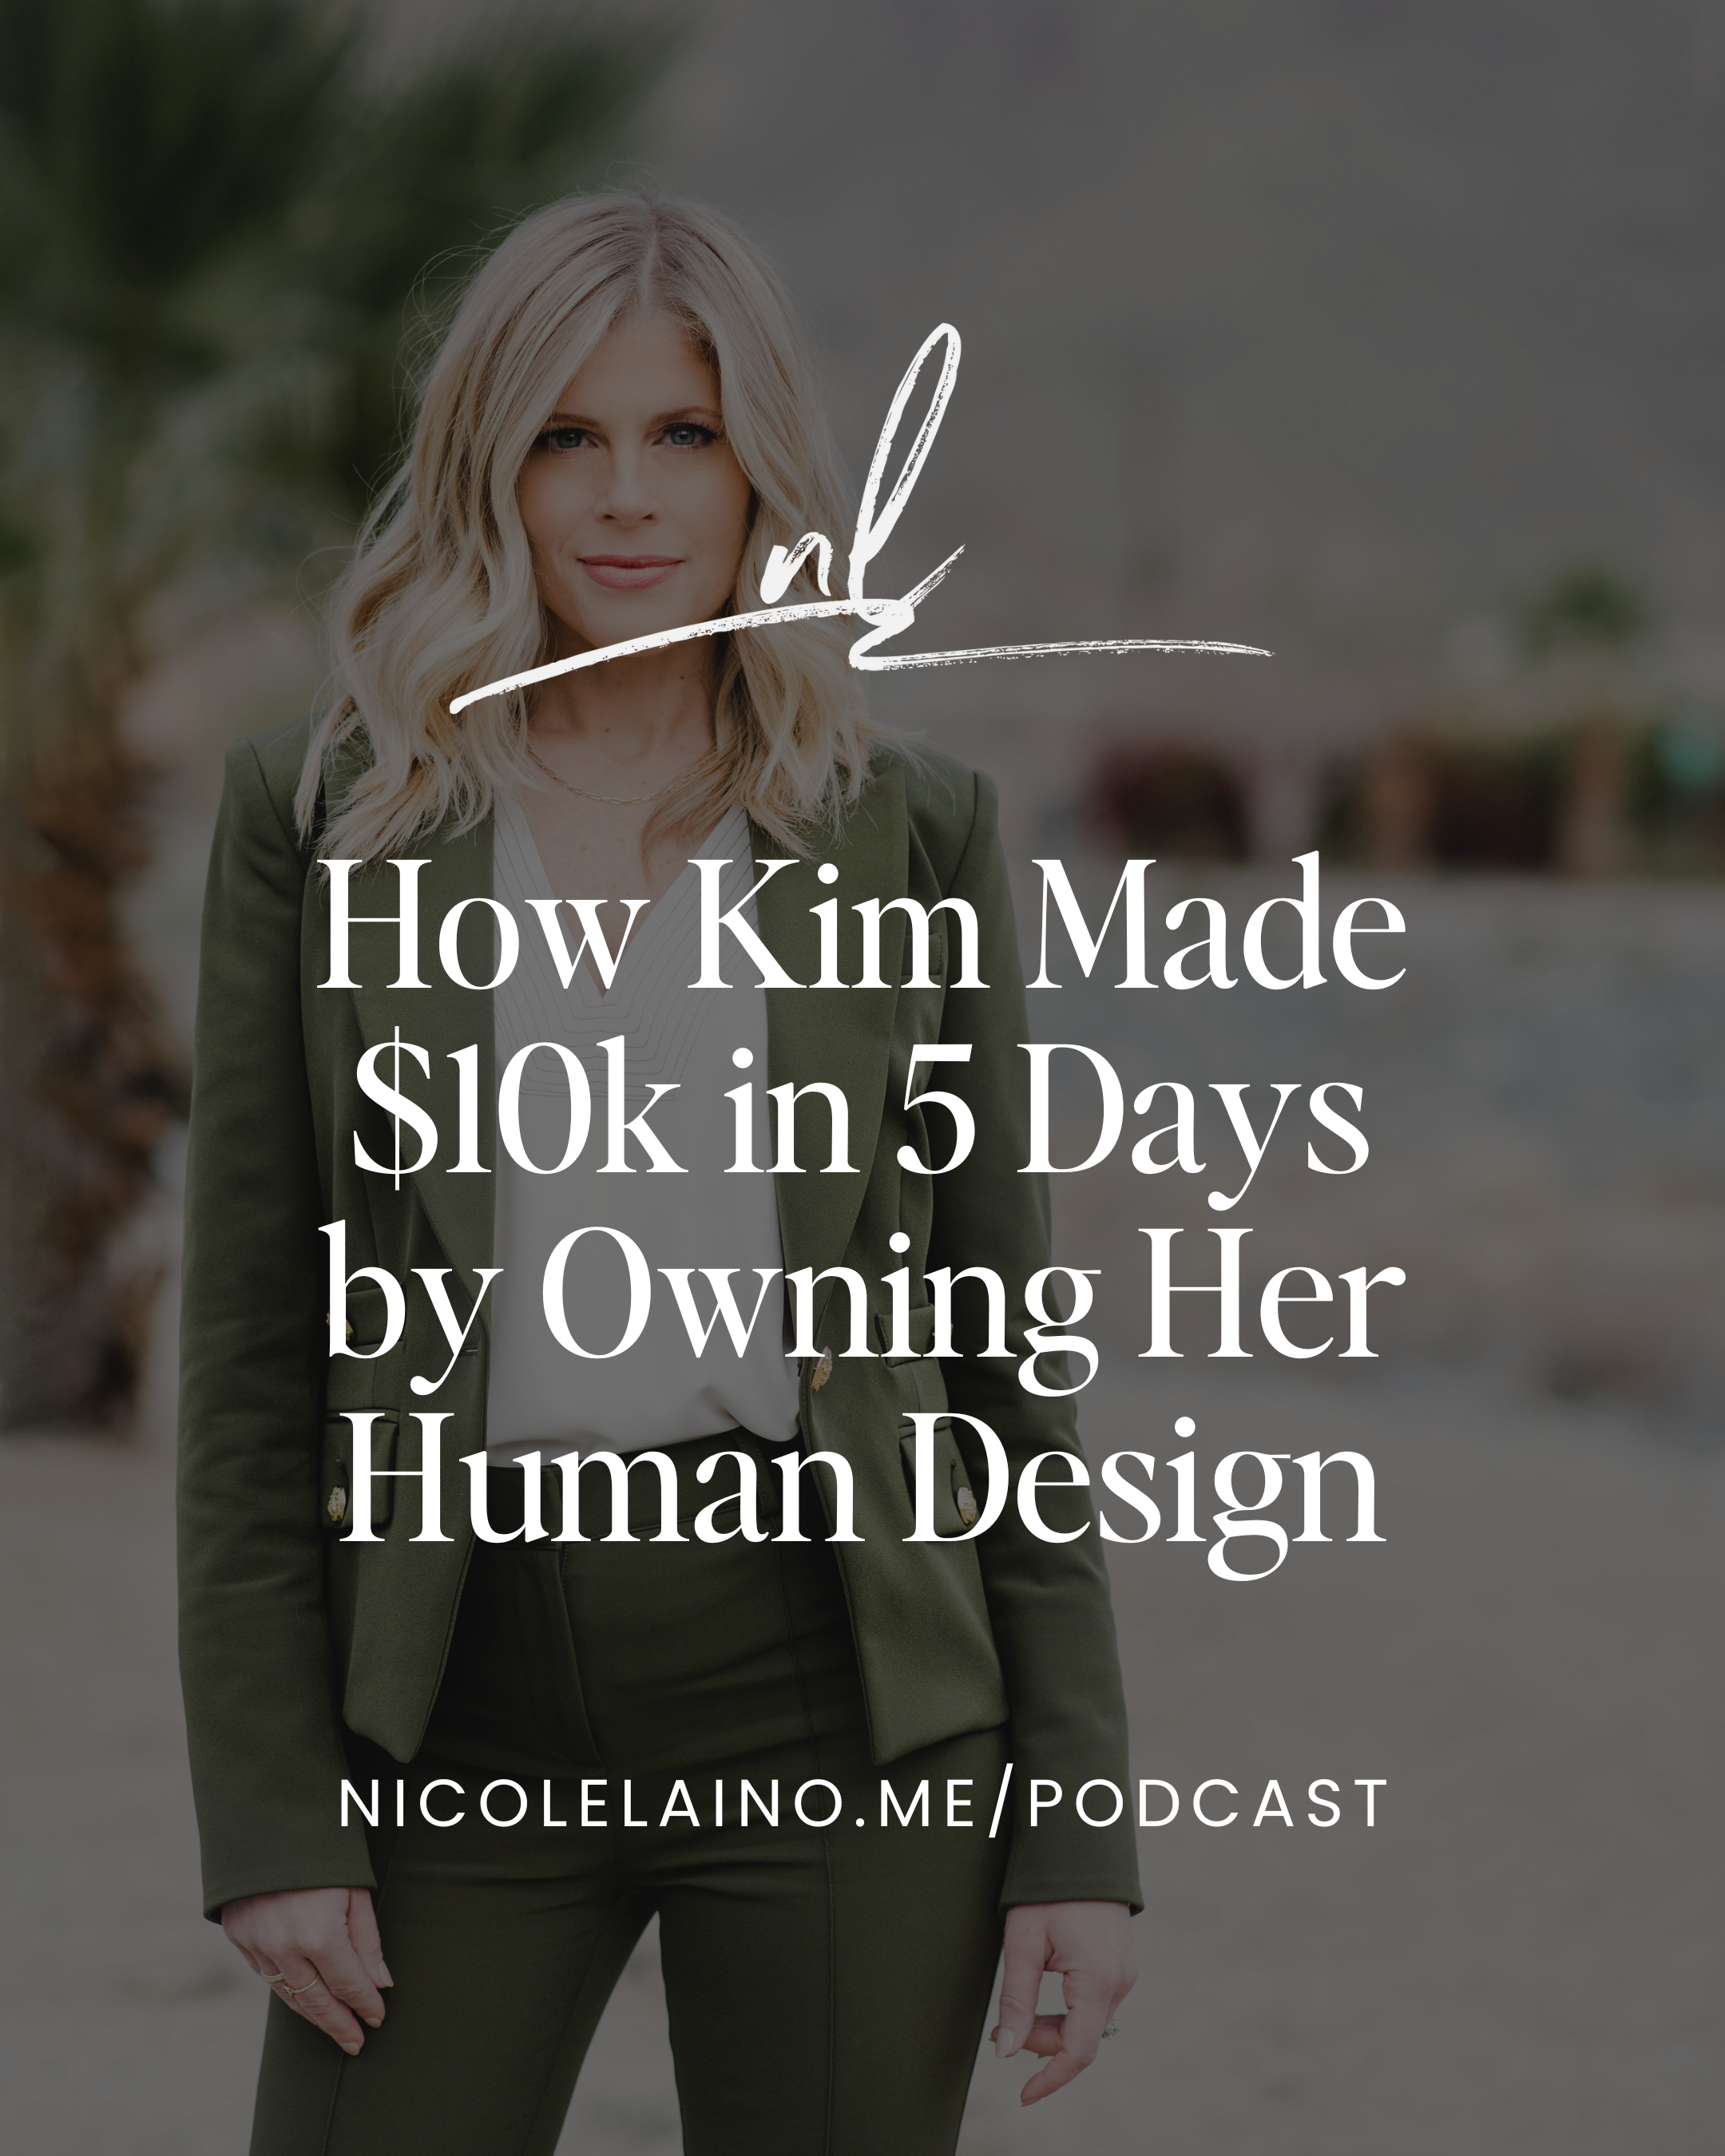 How Kim Made $10k in 5 Days by Owning Her Human Design